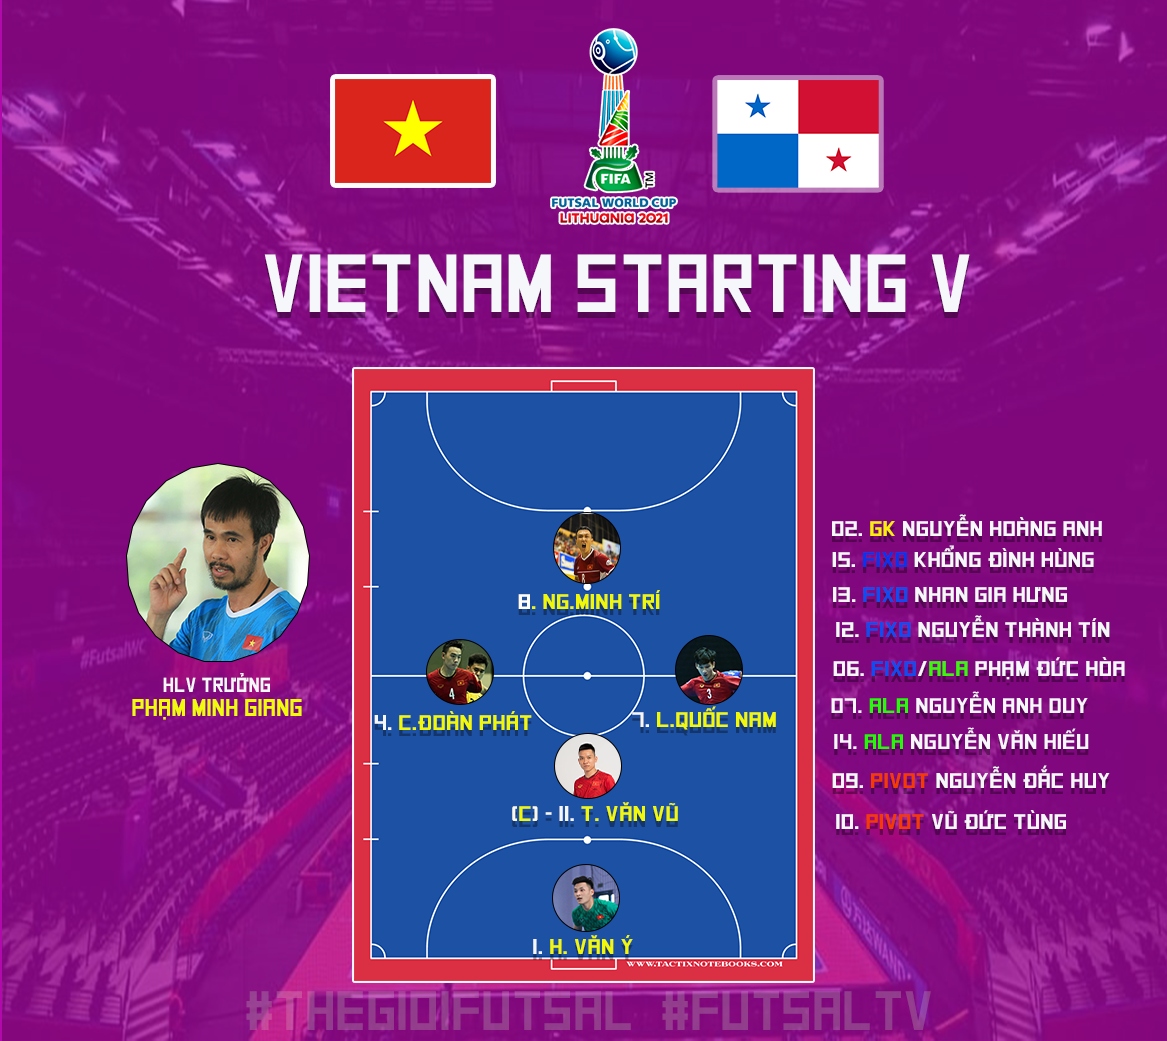 thang kich tinh panama, Dt futsal viet nam nuoi hy vong di tiep o world cup hinh anh 4